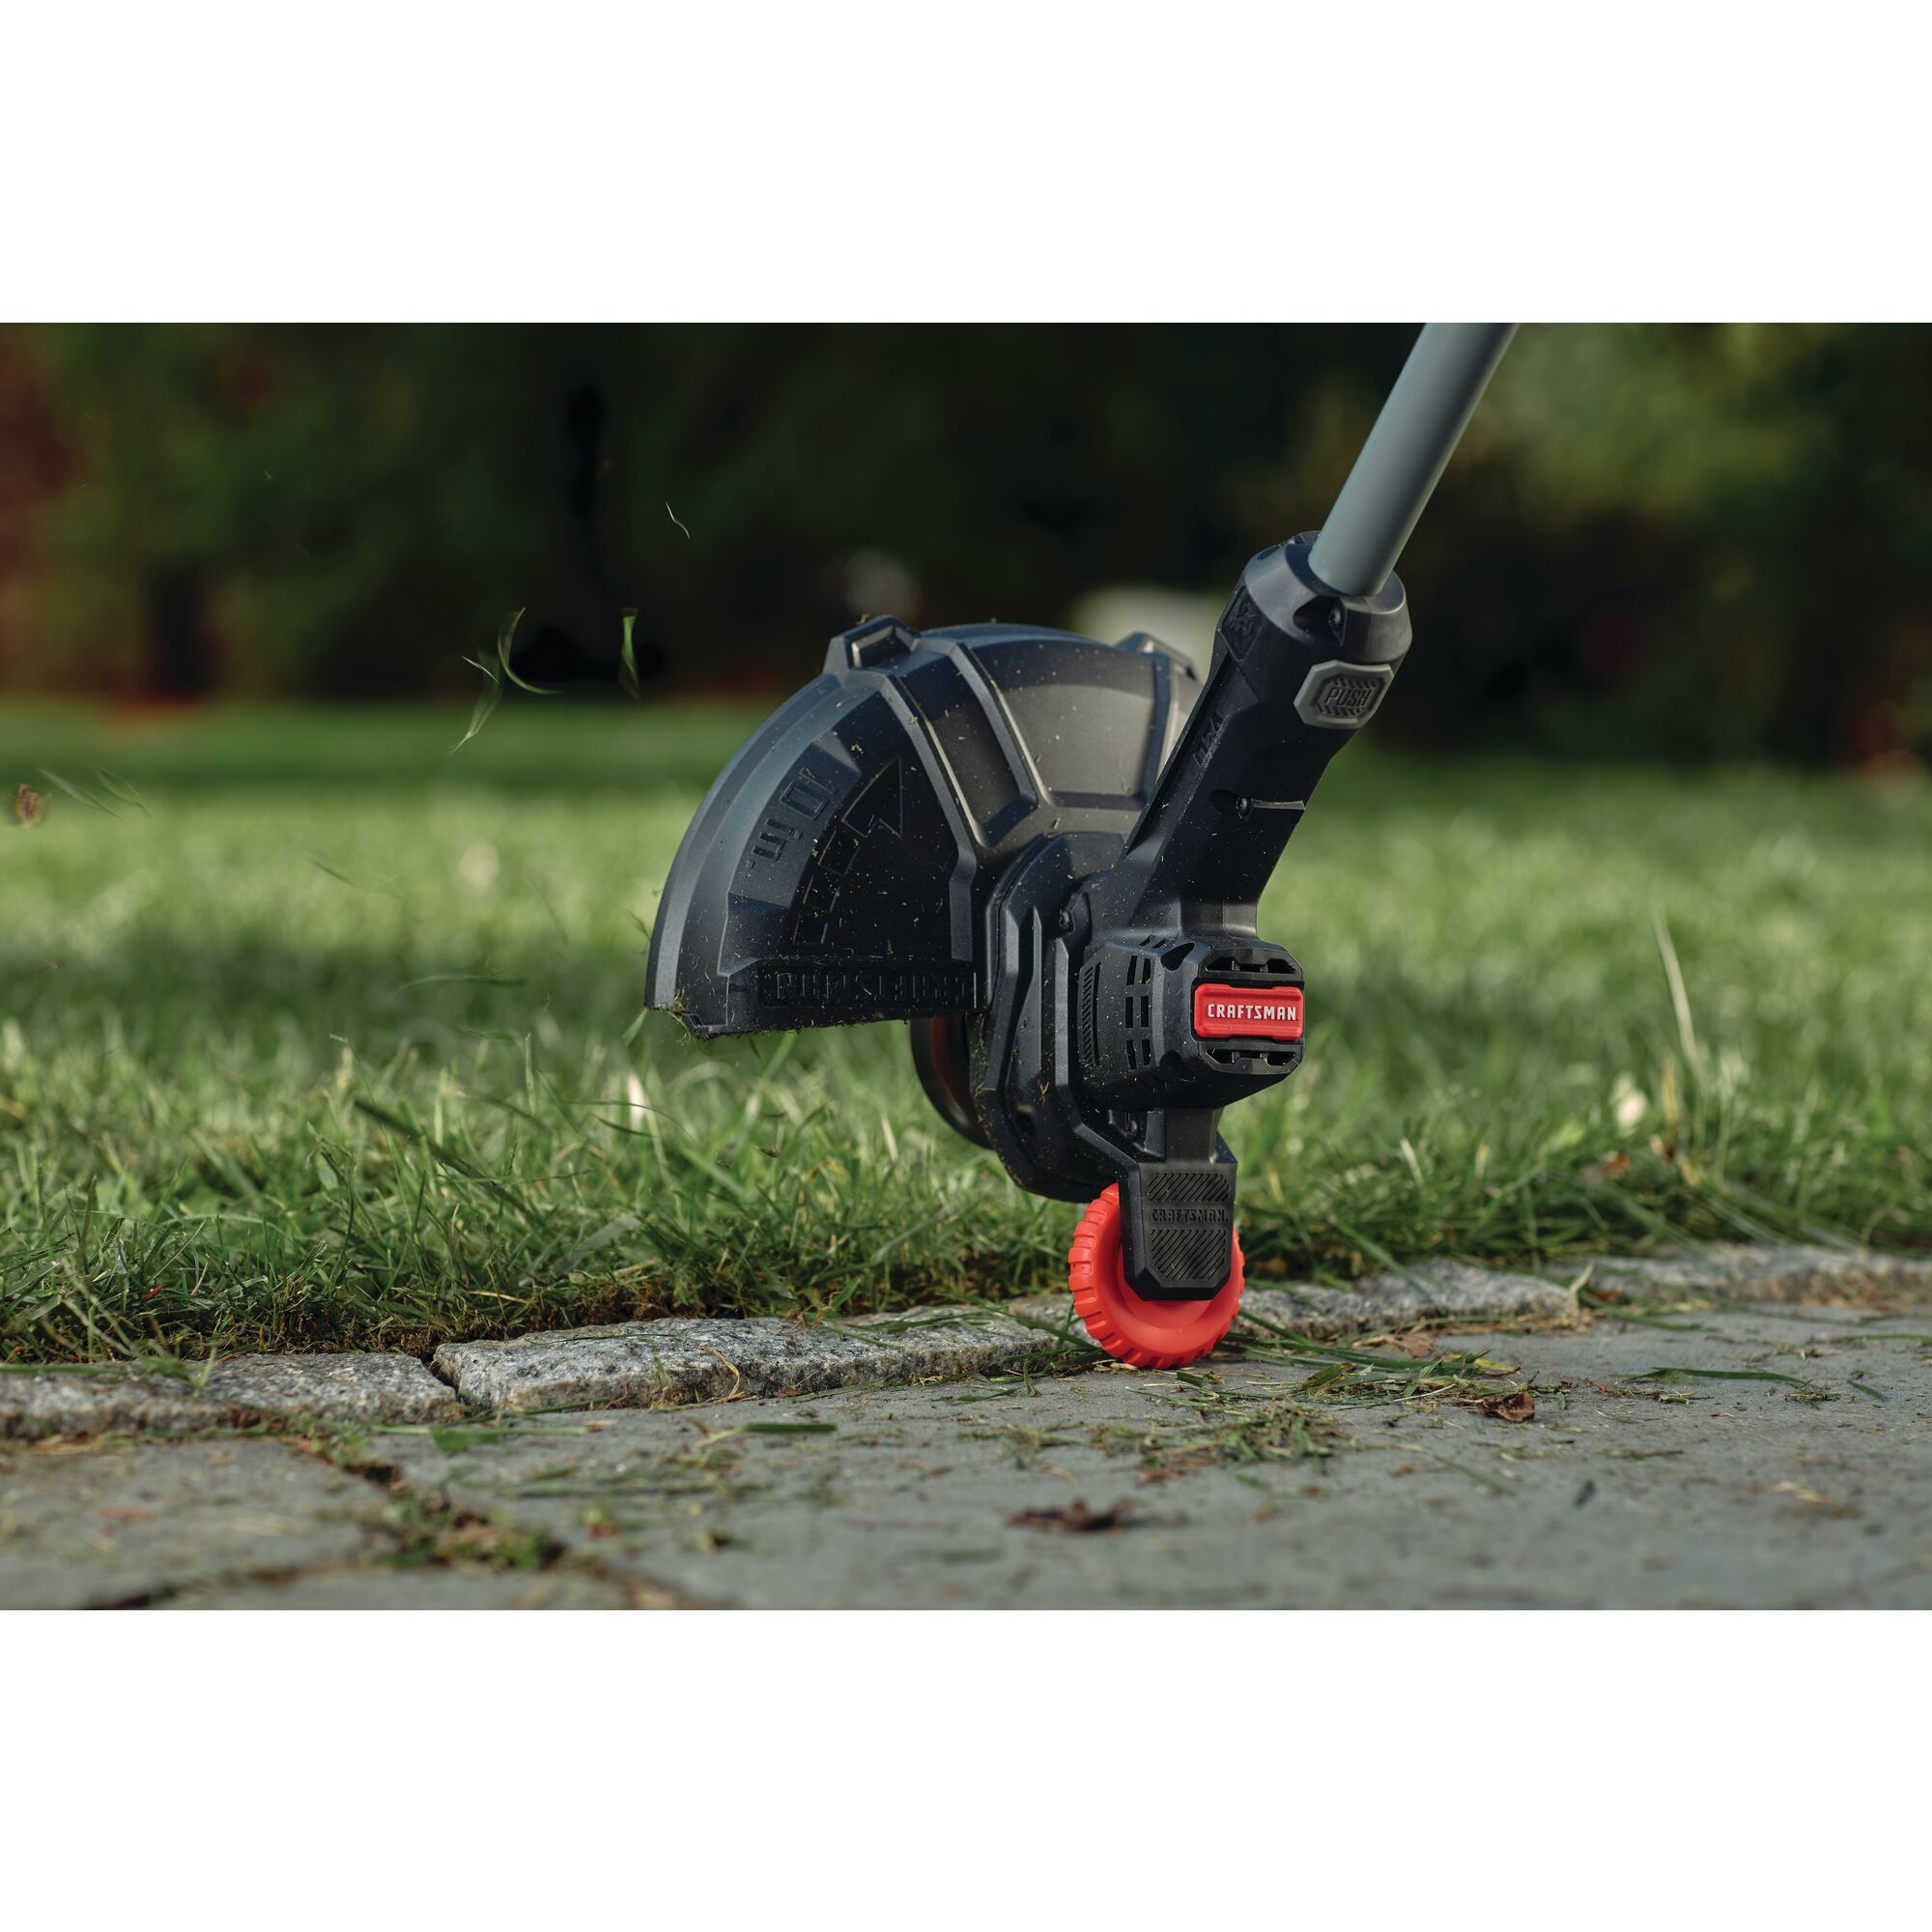 Integrated wheeled edge guide 20 volt cordless 10 inch weedwacker string trimmer and edger 1.5 ampere per hour.